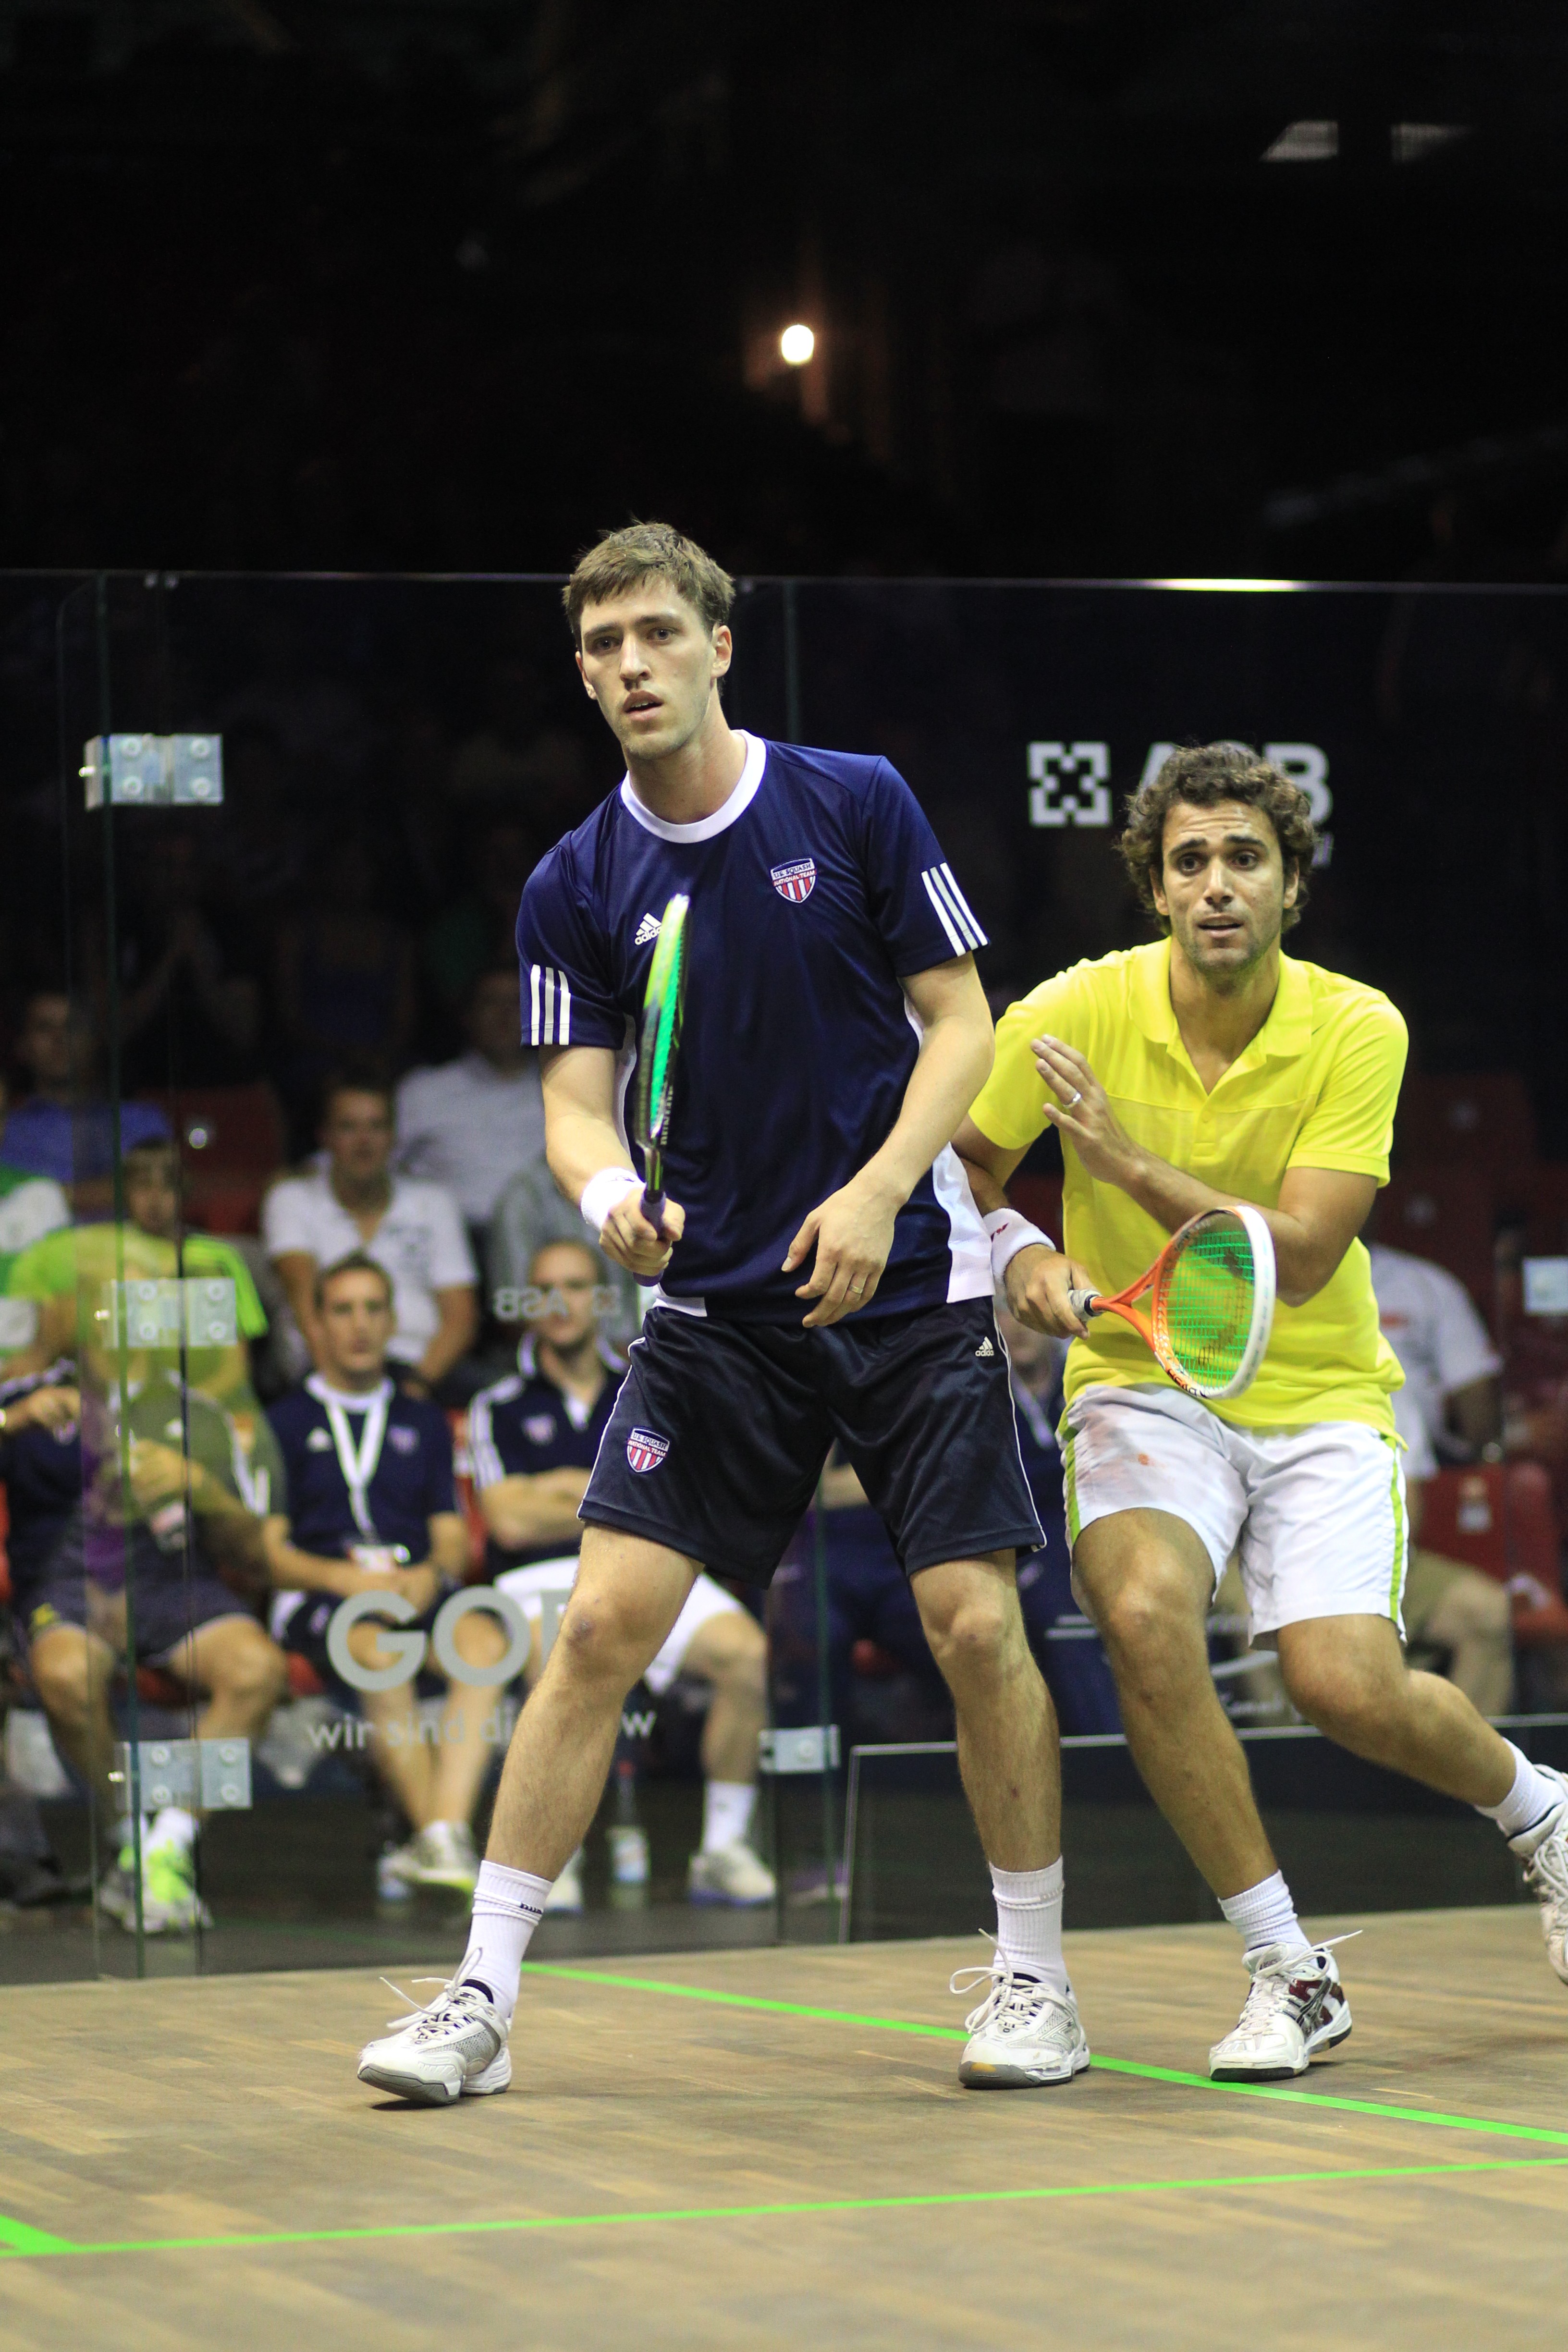 Despite a World Ranking that has slipped from a high of No. 24 in January 2012 to his current No. 55, Julian Illingworth (L) will be looking to lead the Americans to a strong performance in France. Along with Illingworth, both Gilly Lane and Chris Gordon have been, or currently are, ranked in the World's Top-50. 